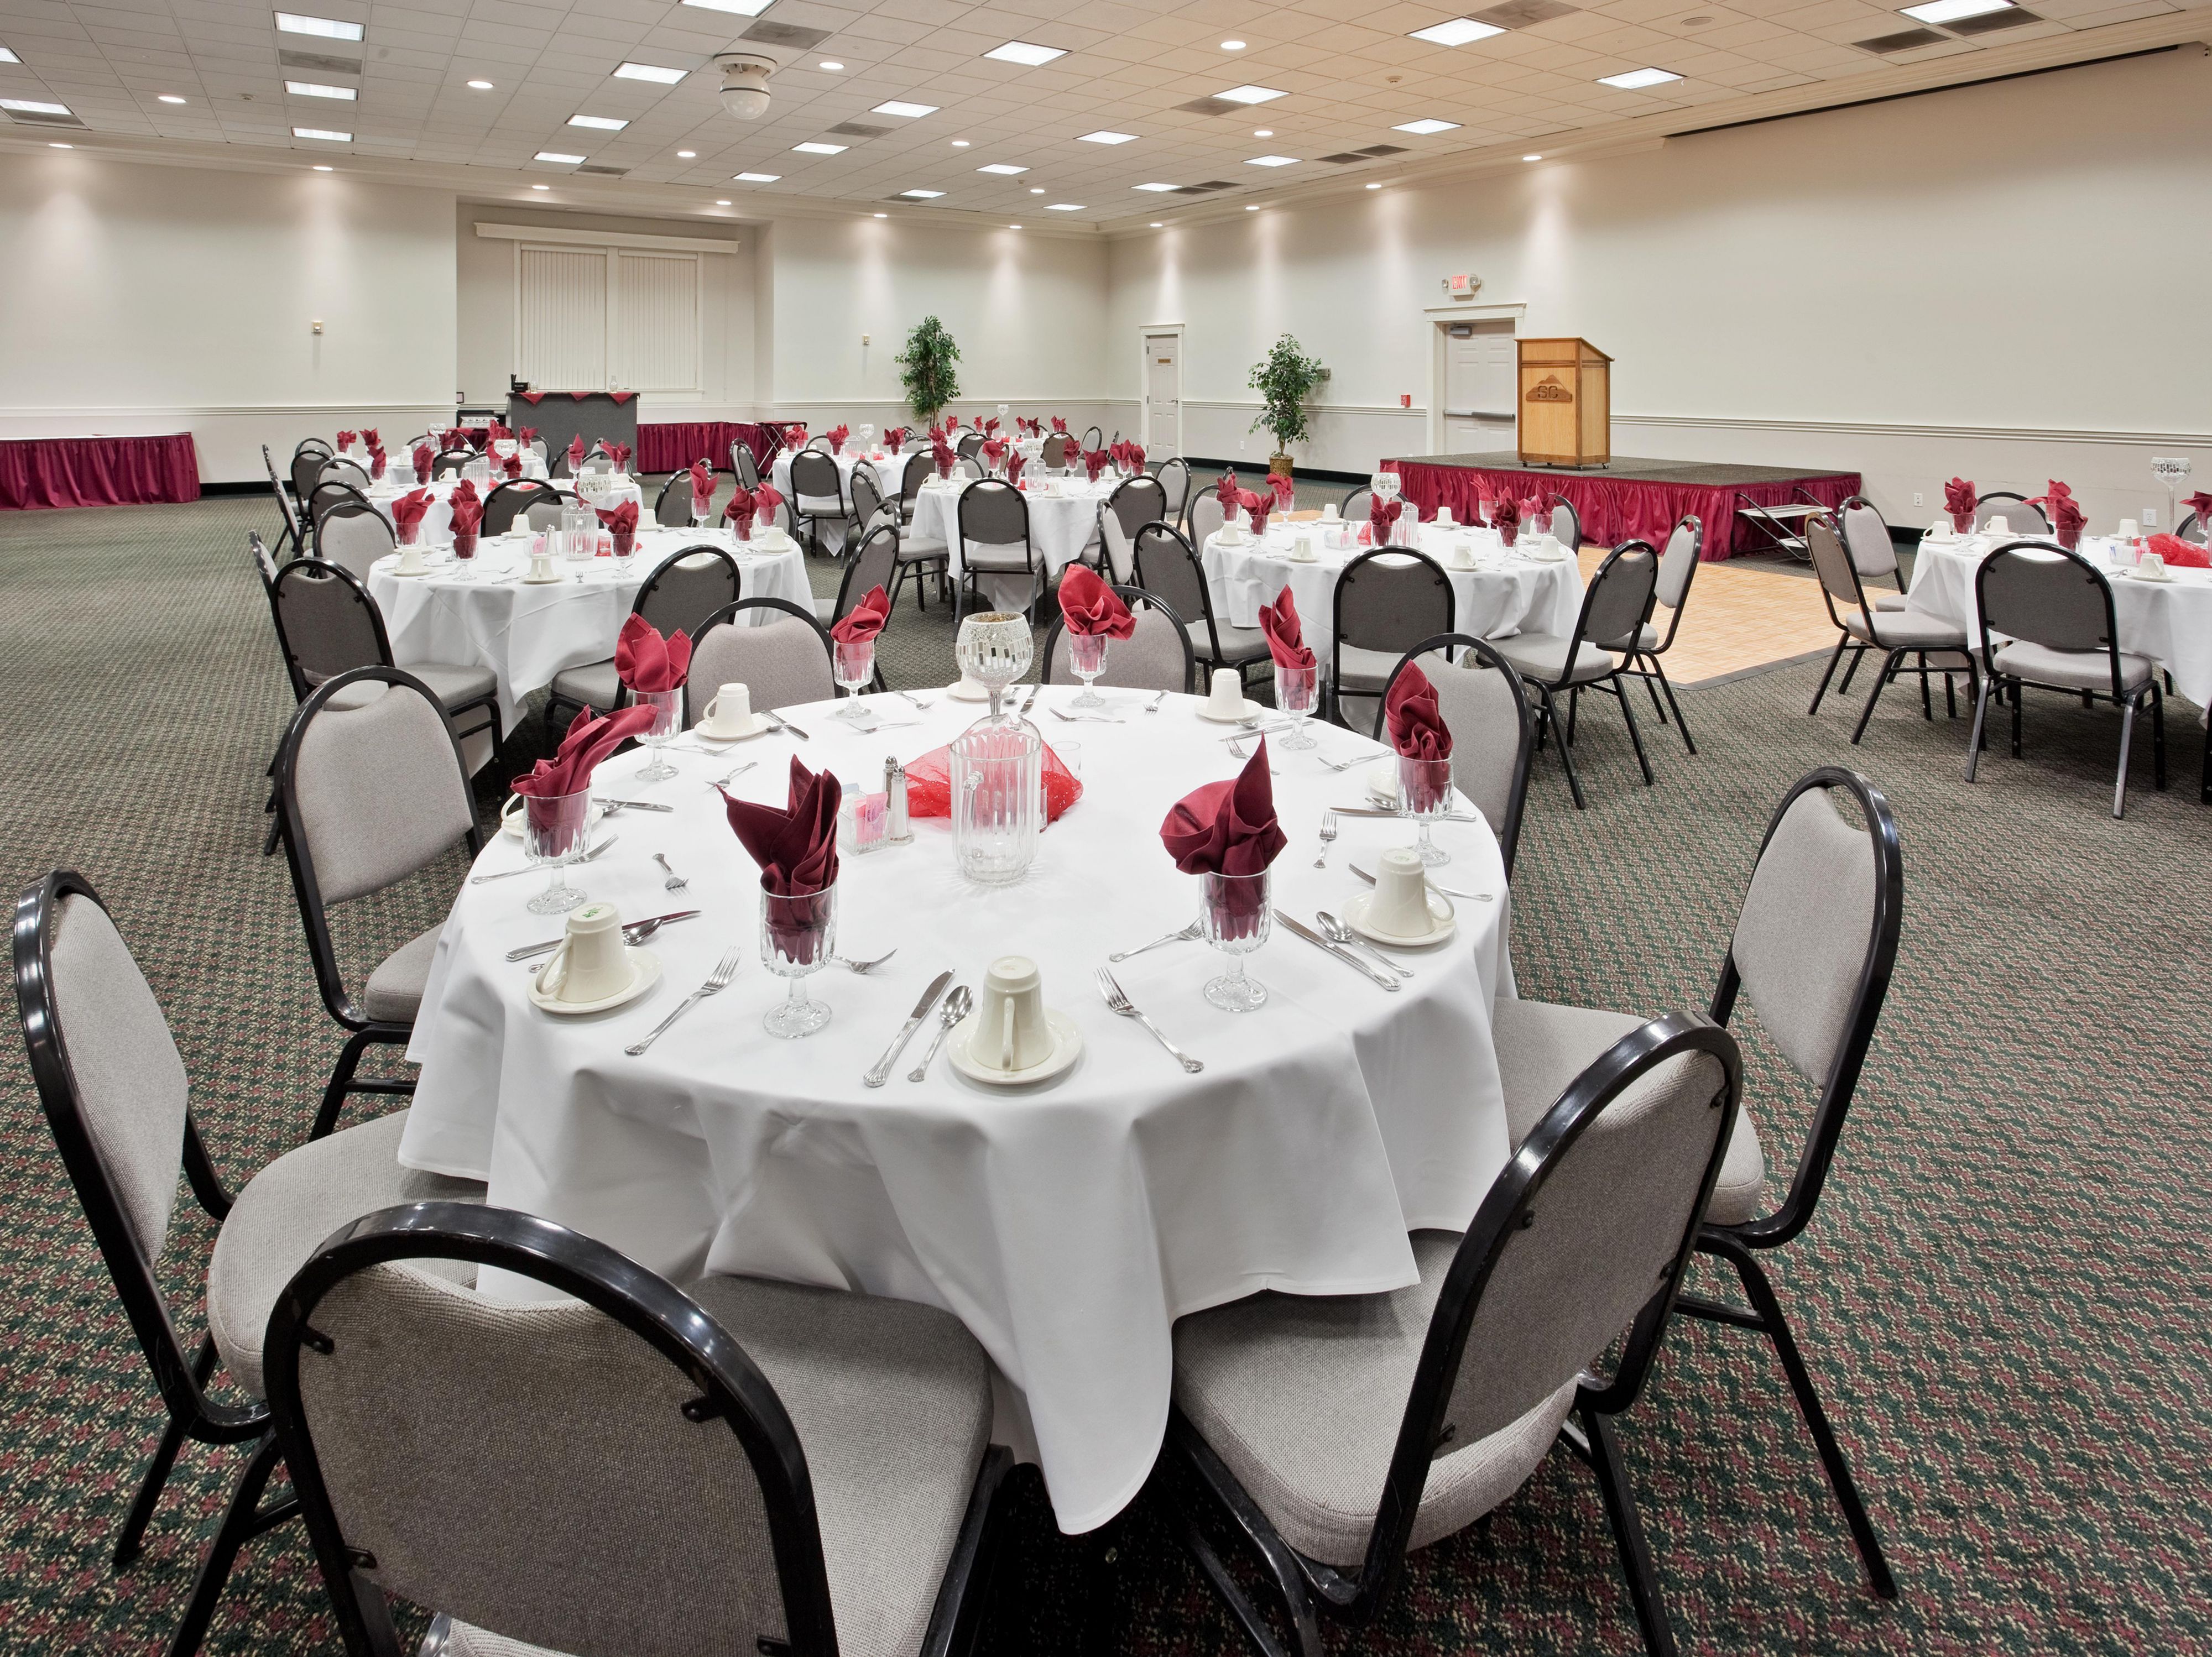 Book any space in our 10,000 square foot convention center for you to enjoy an exposition or party. We can accommodate up to 600 people for a dinner party.